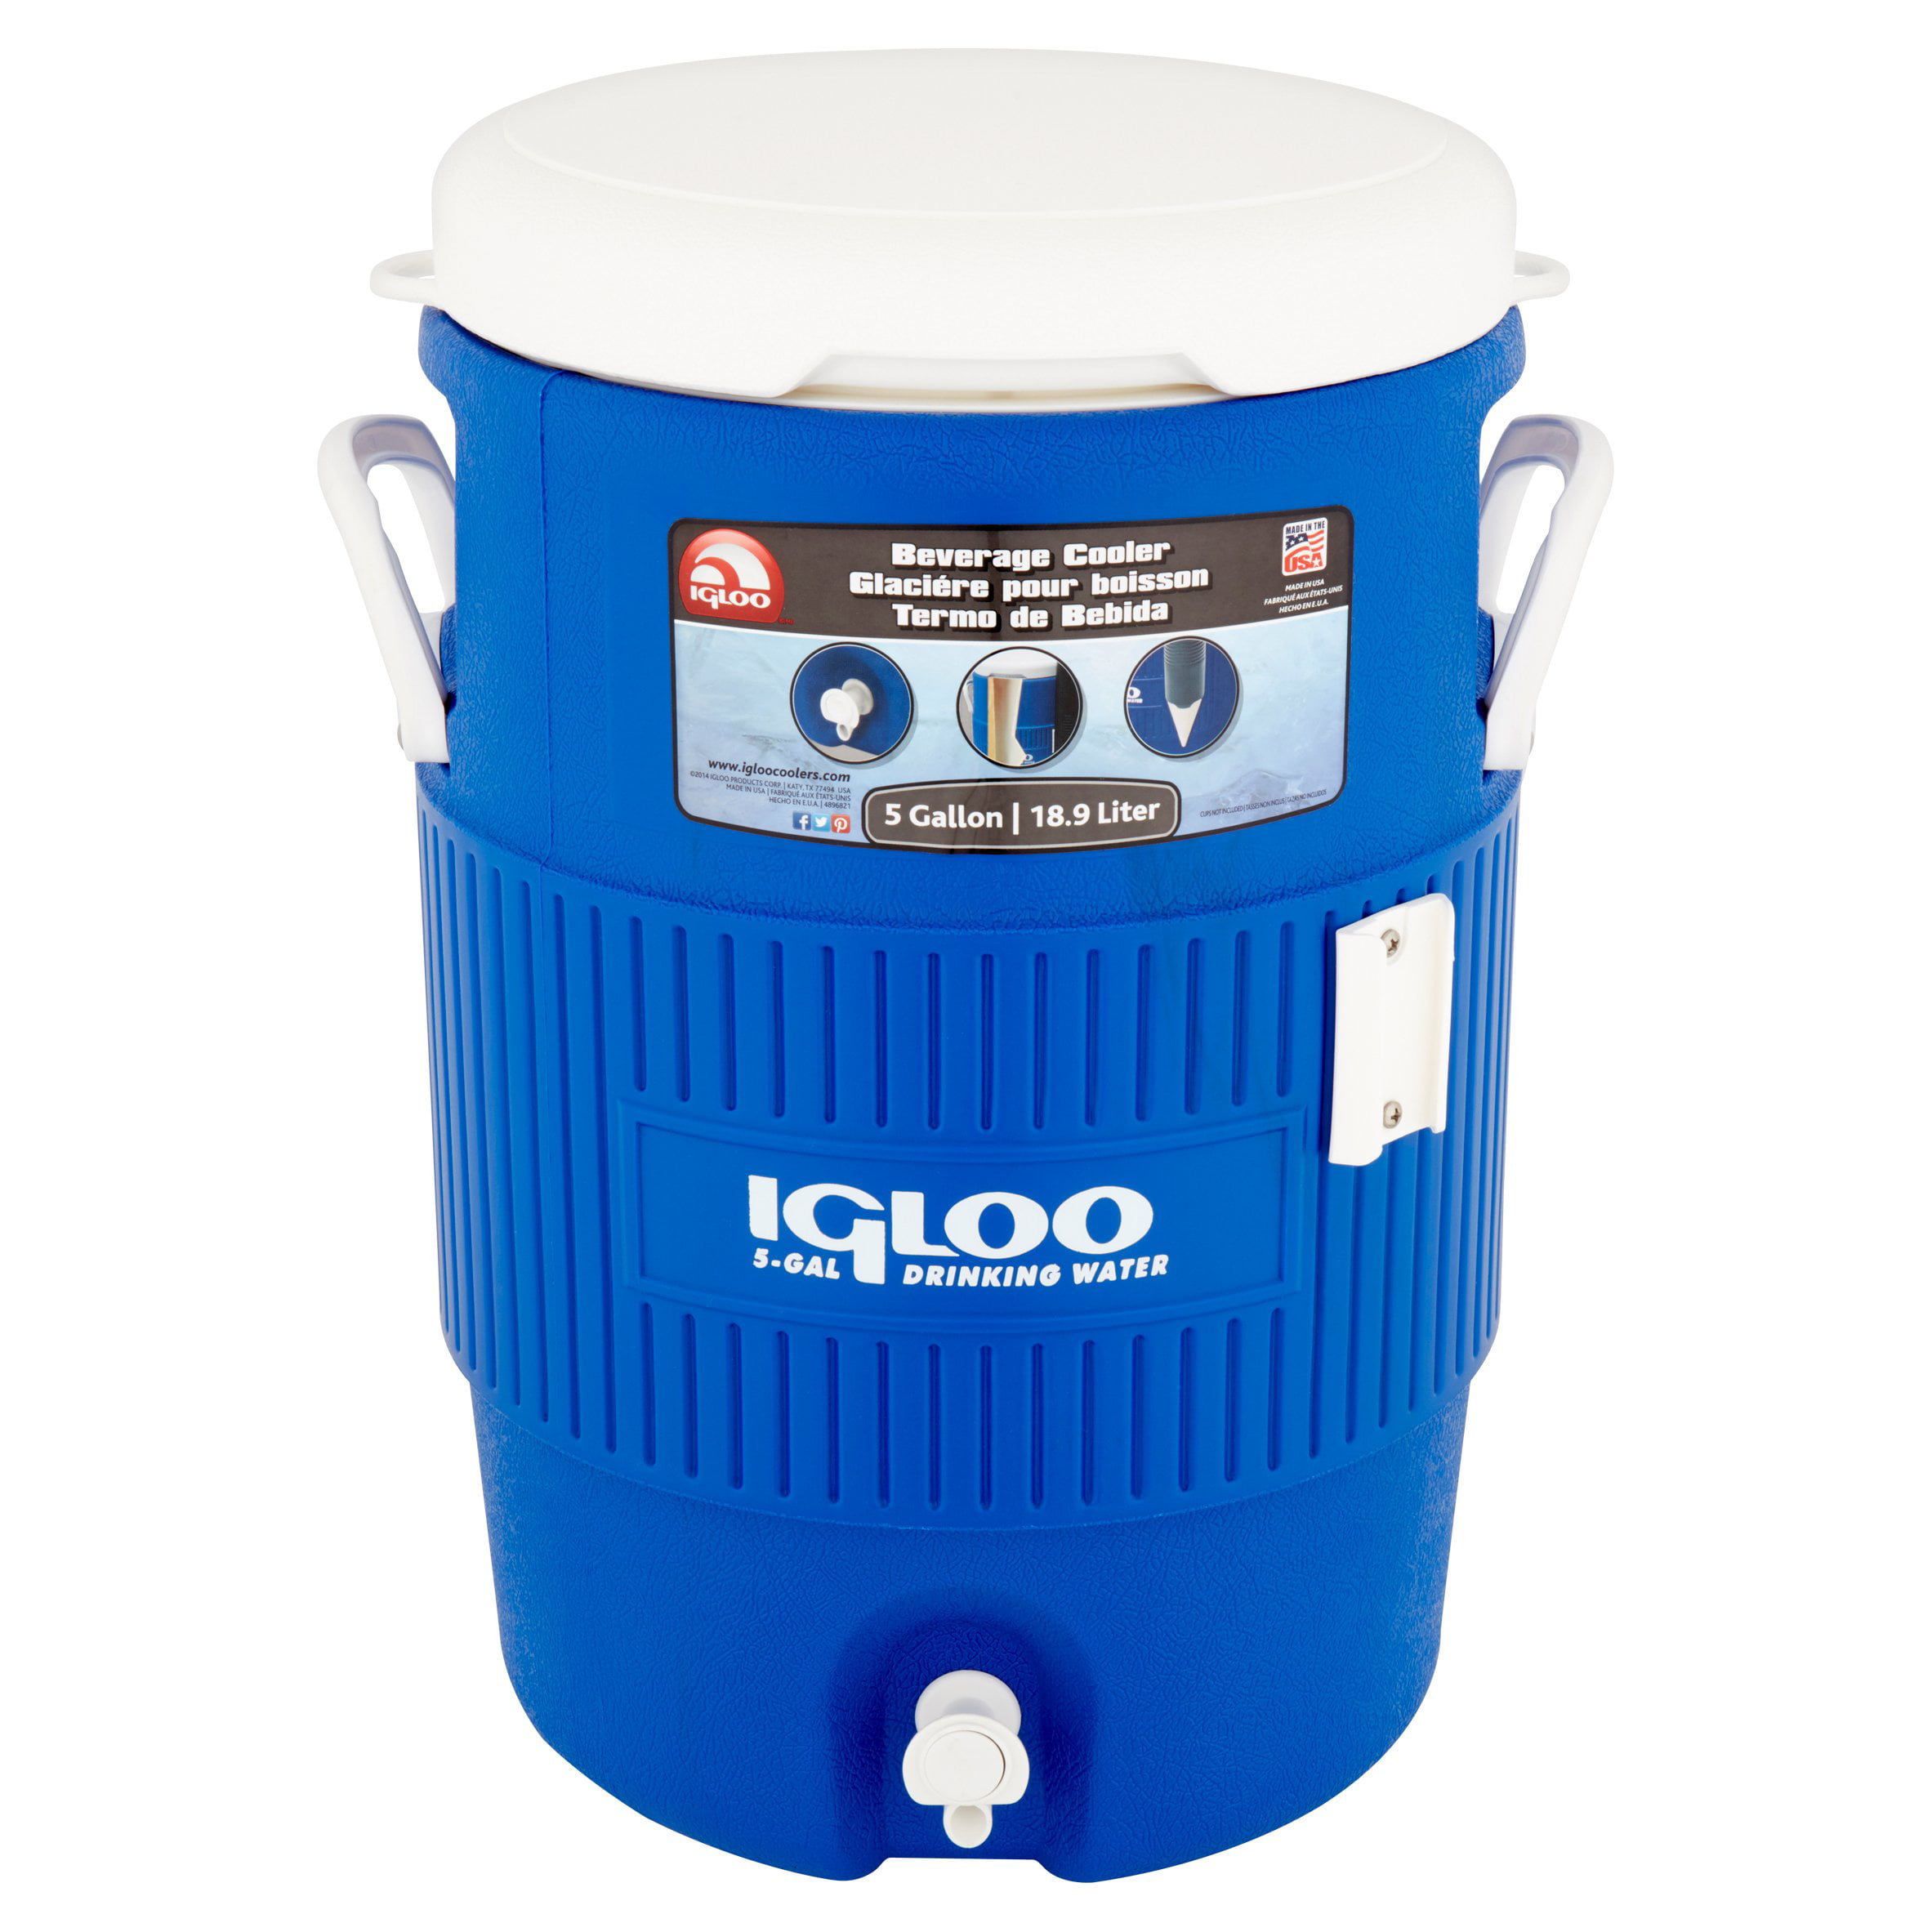 igloo drink cooler with spout